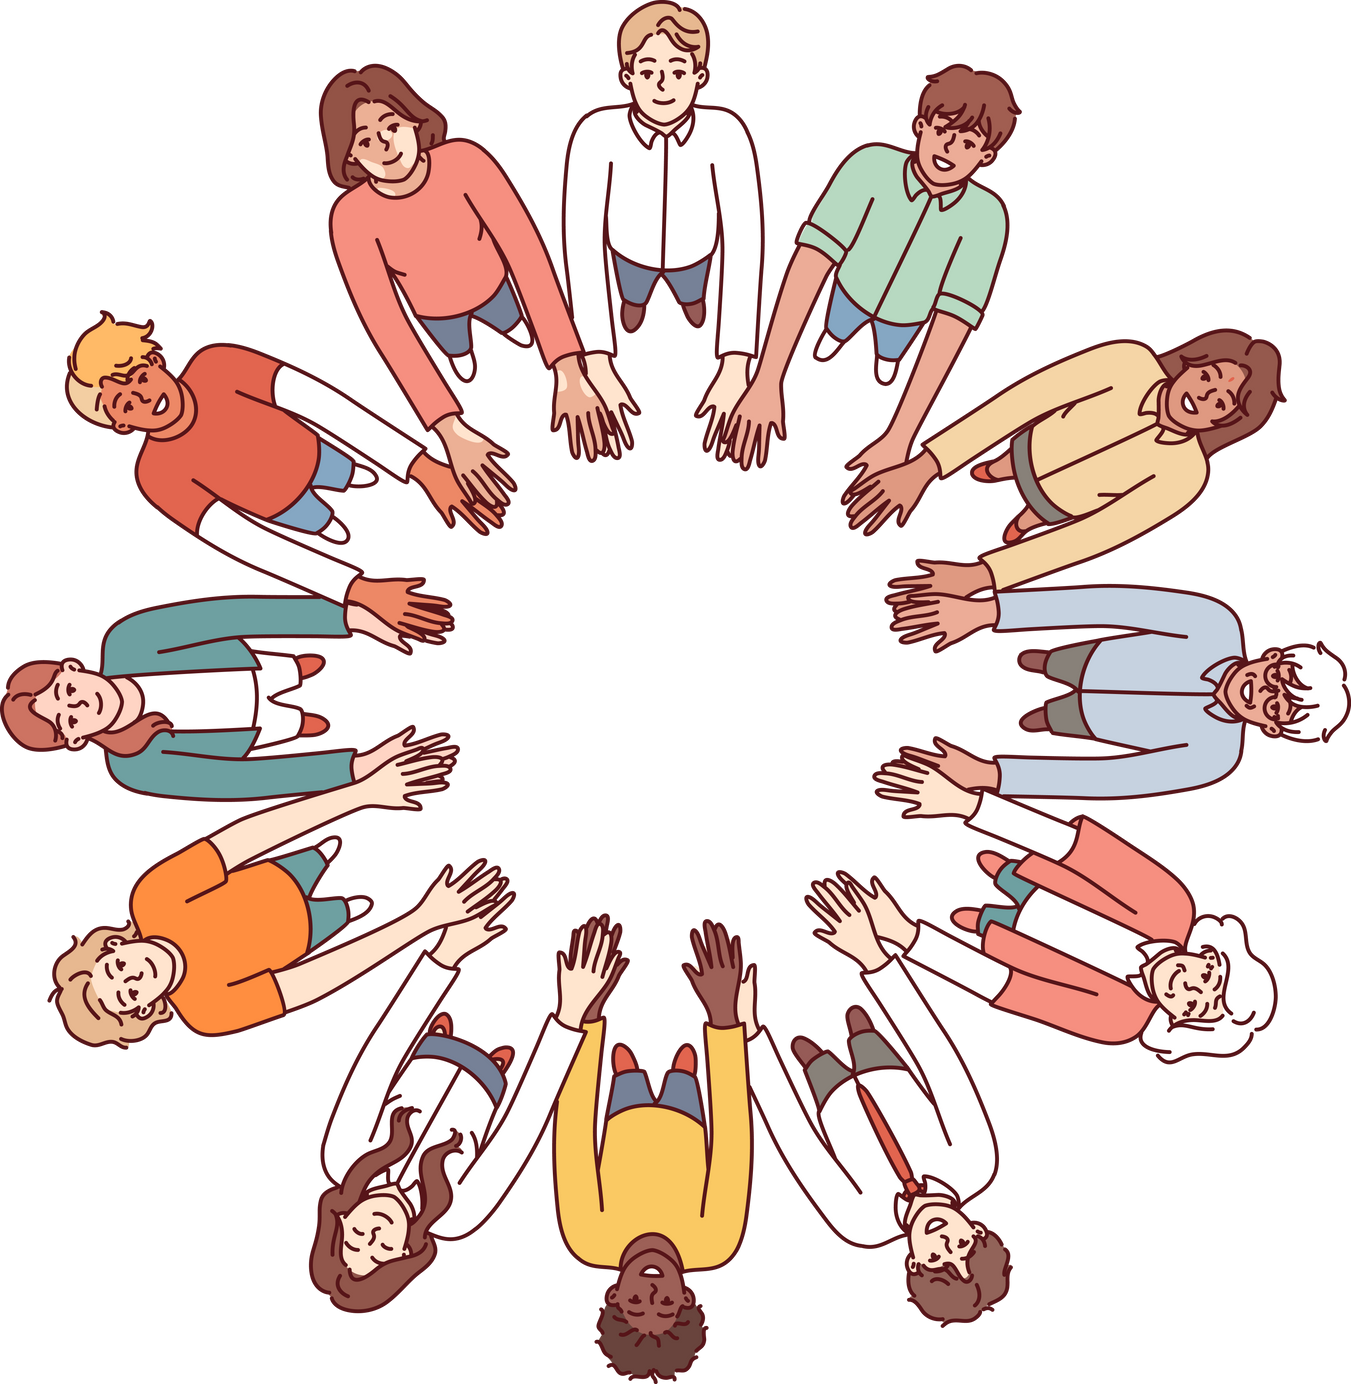 Friendly people stand in circle hold hands for collaboration and teamwork, top view